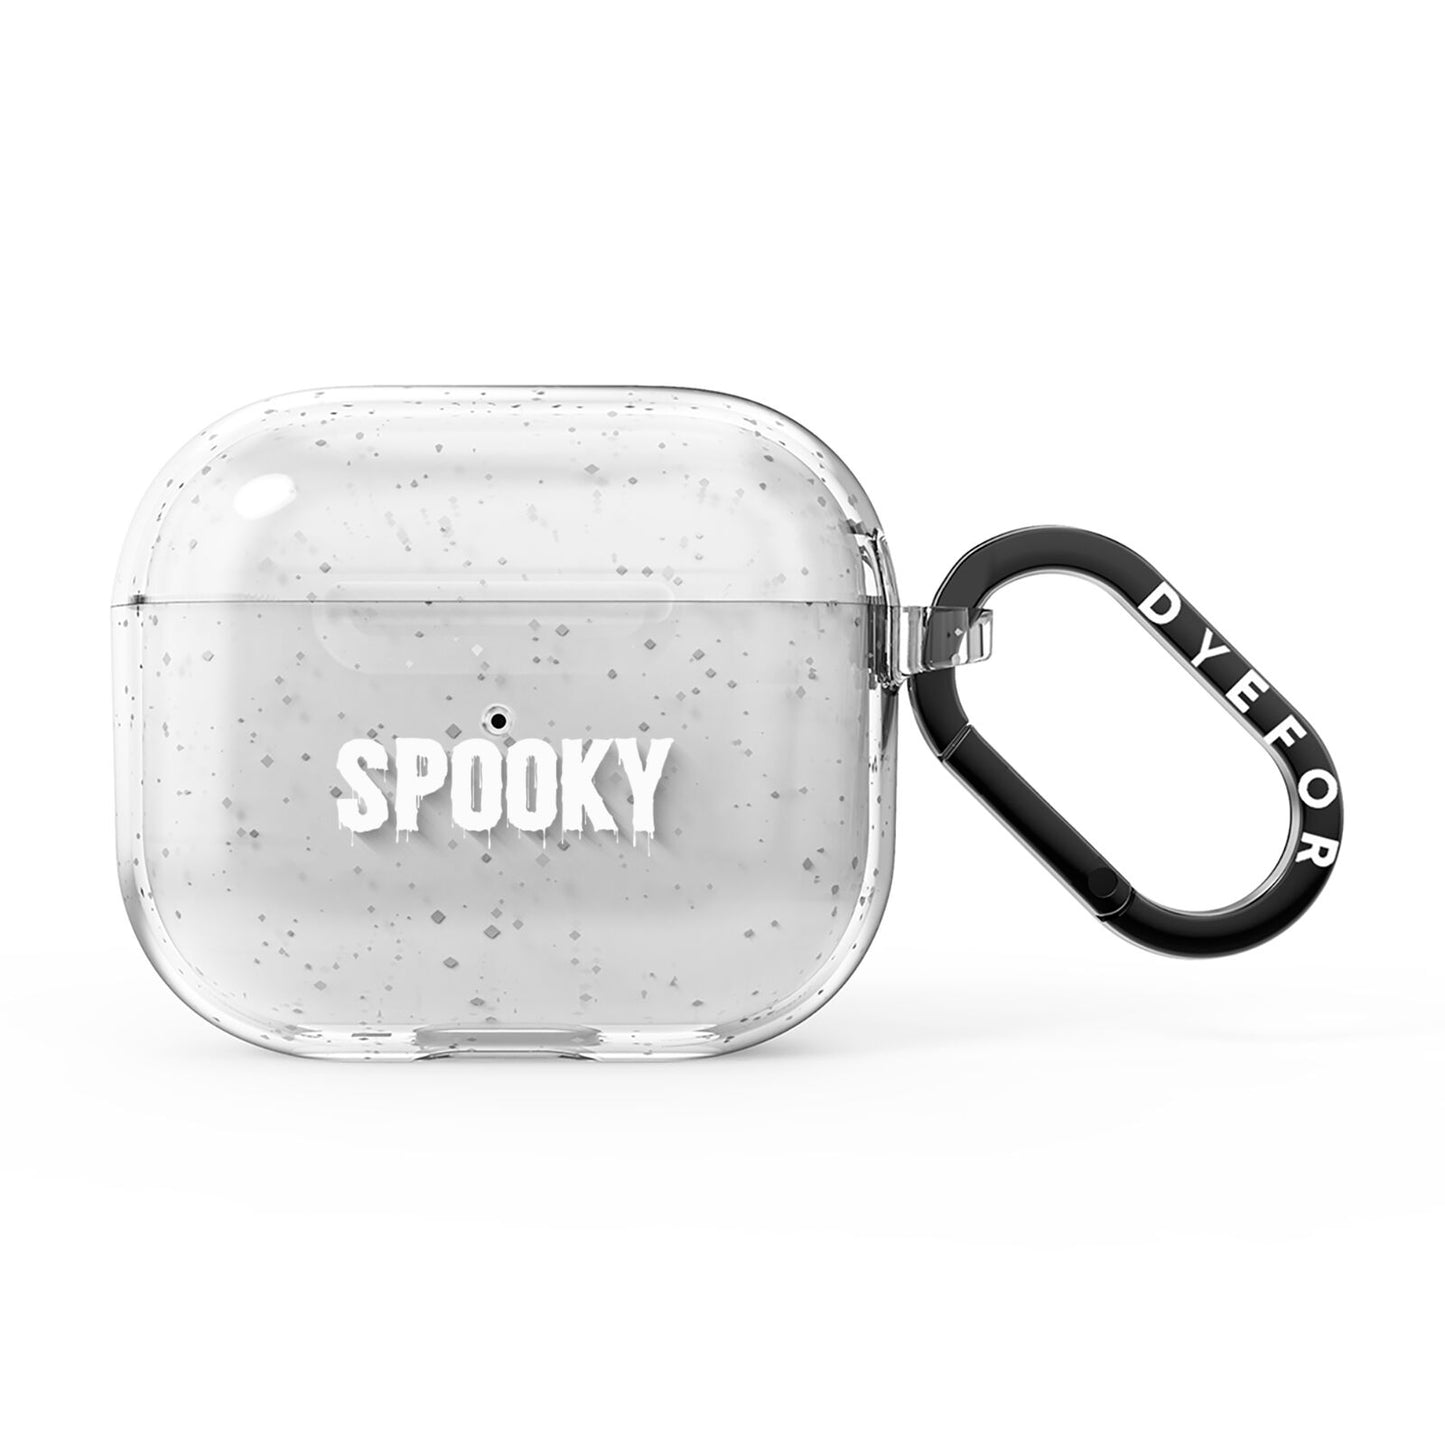 White Dripping Spooky Text AirPods Glitter Case 3rd Gen